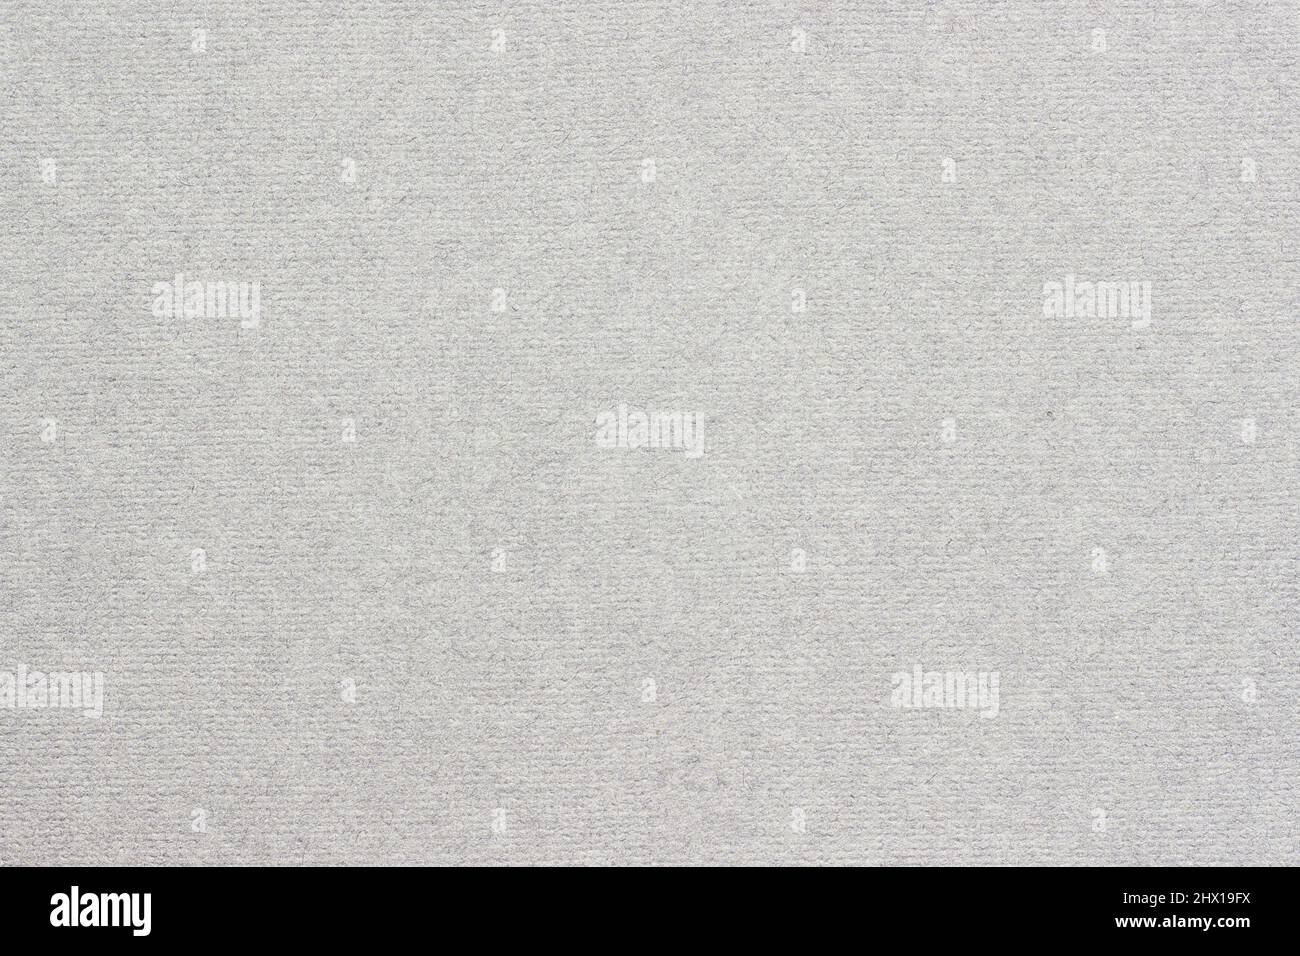 Texture grey pastel paper background. Template for your design Stock ...